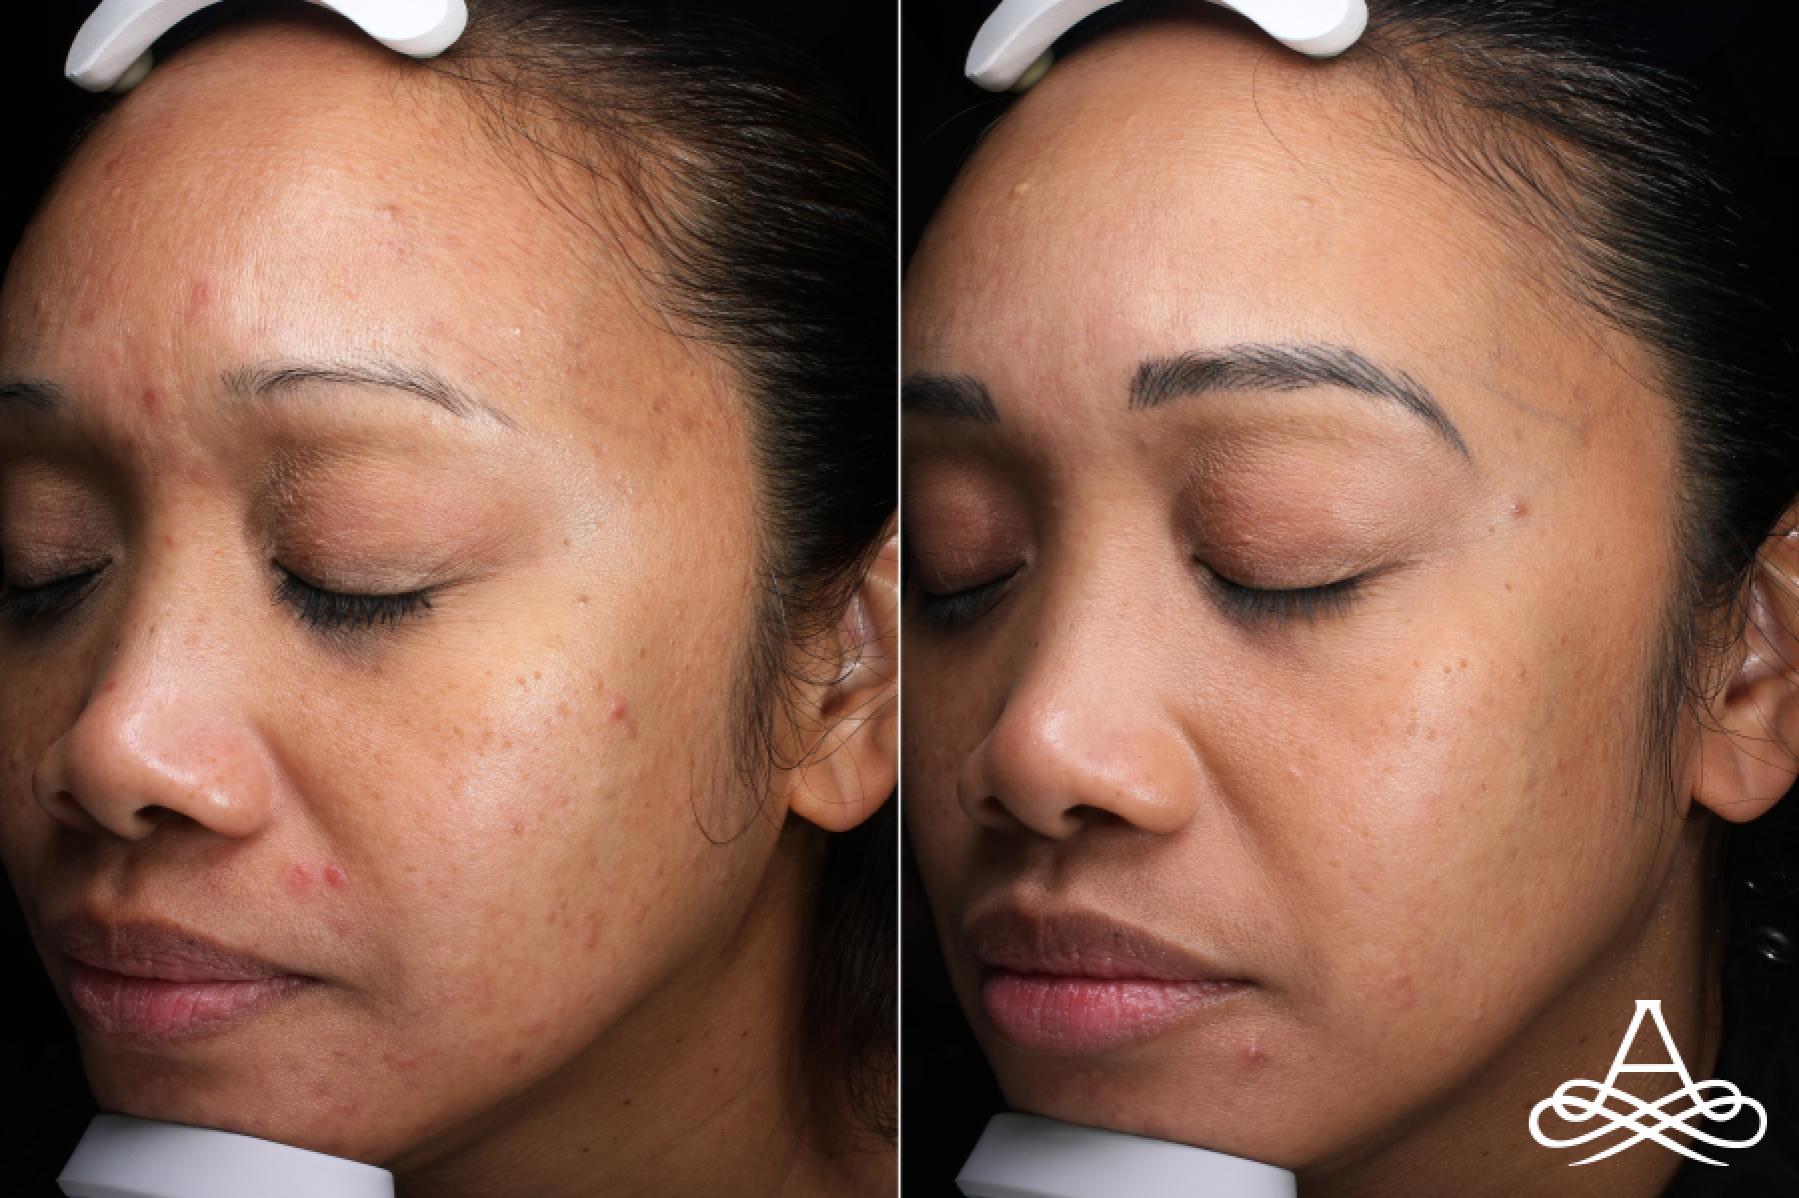 Acne Scars: Patient 2 - Before and After 2